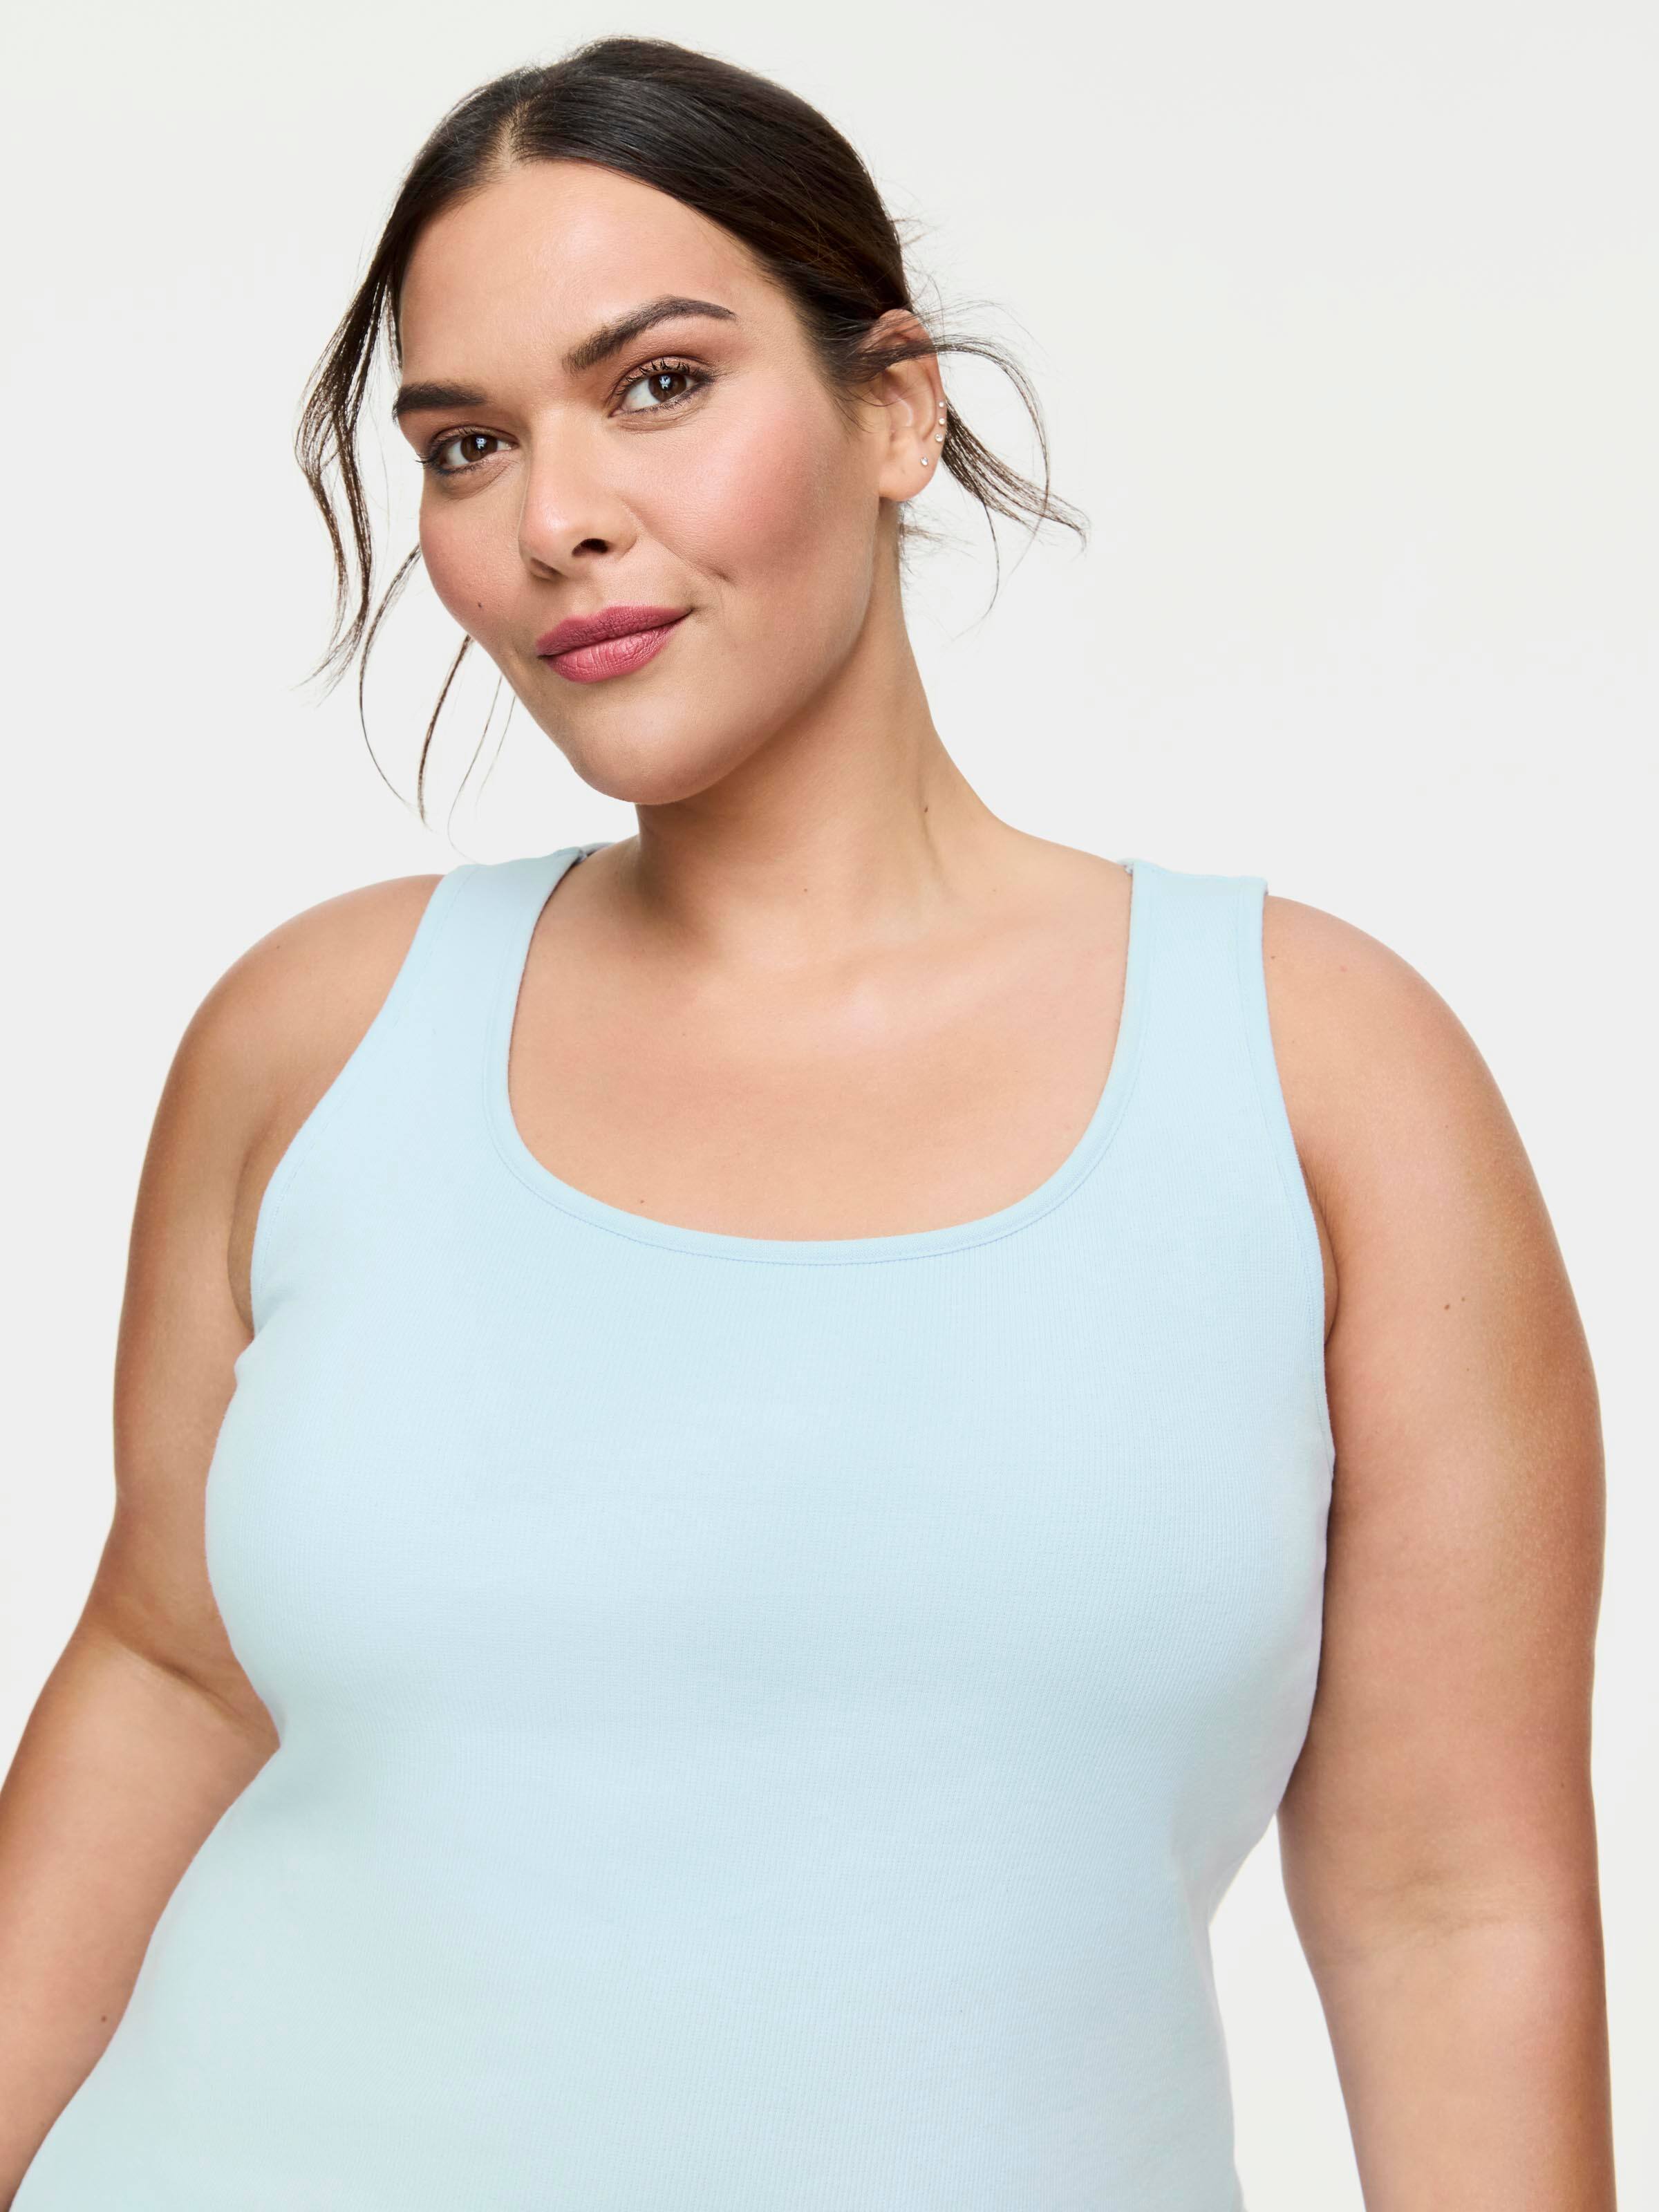 Bras for Women Womens Tank Tops with Built in Bra Plus Size